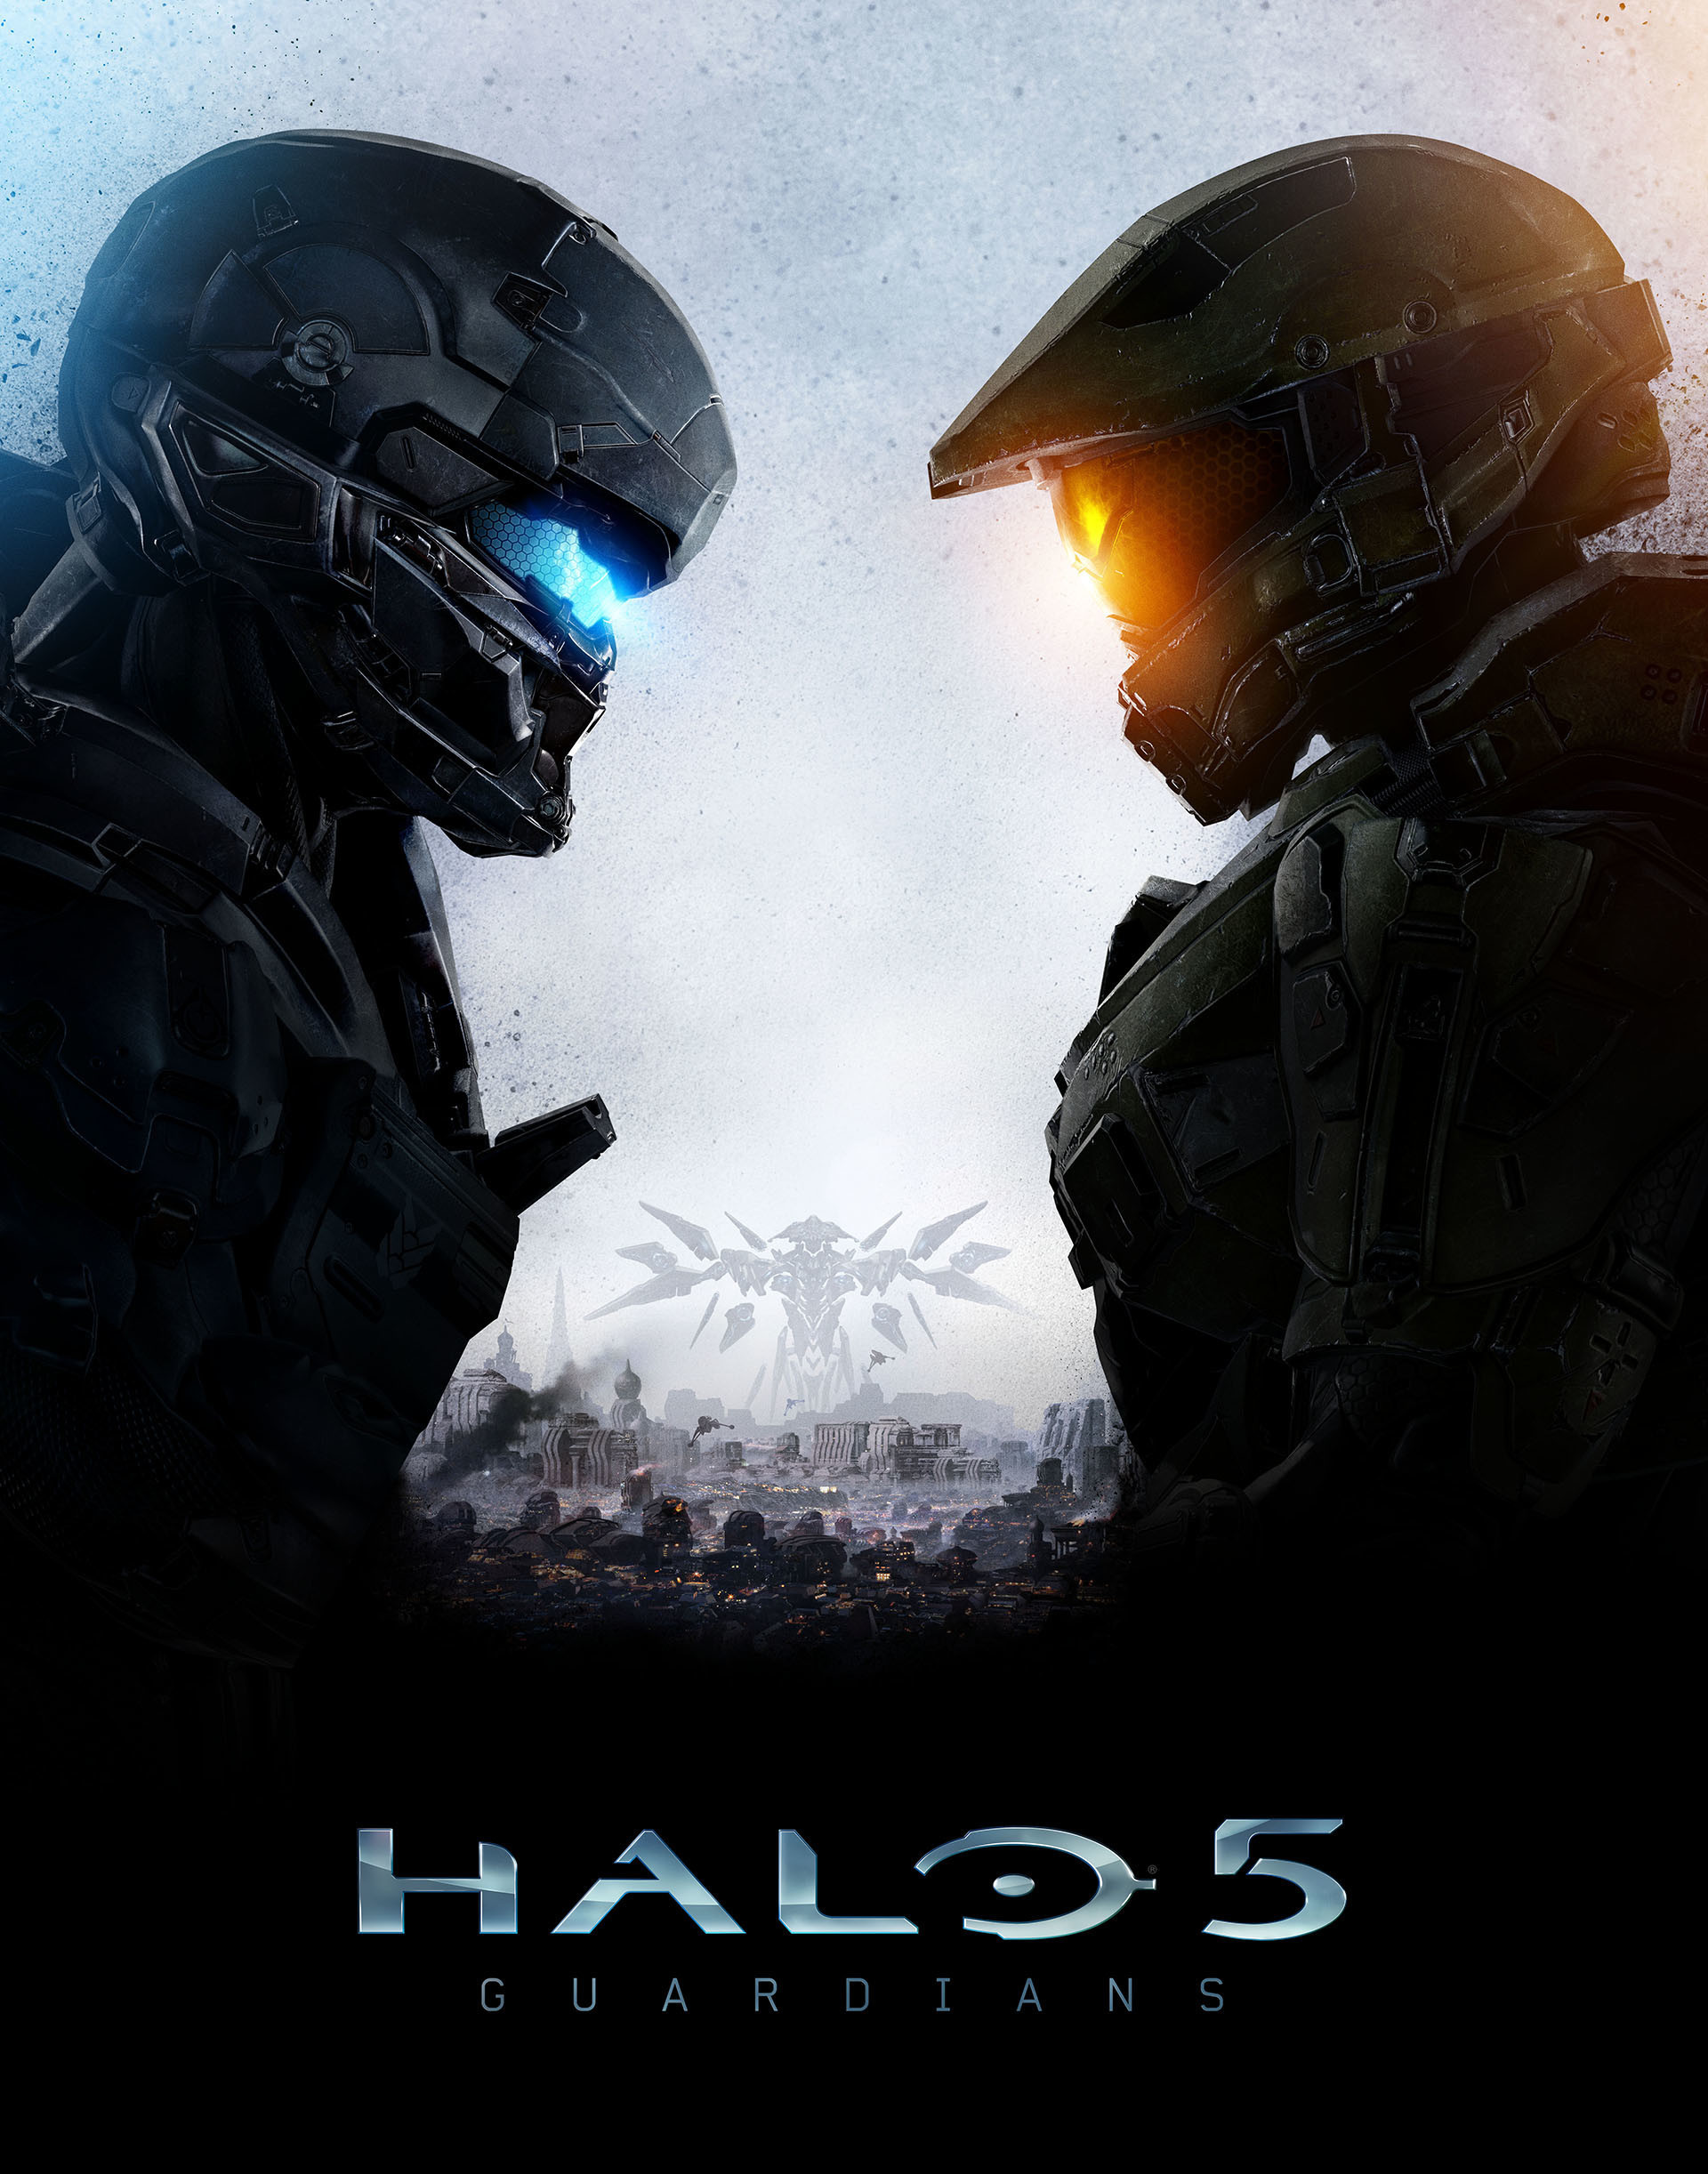 Microsoft unveils 'Halo 5 Guardians' cover art, new in